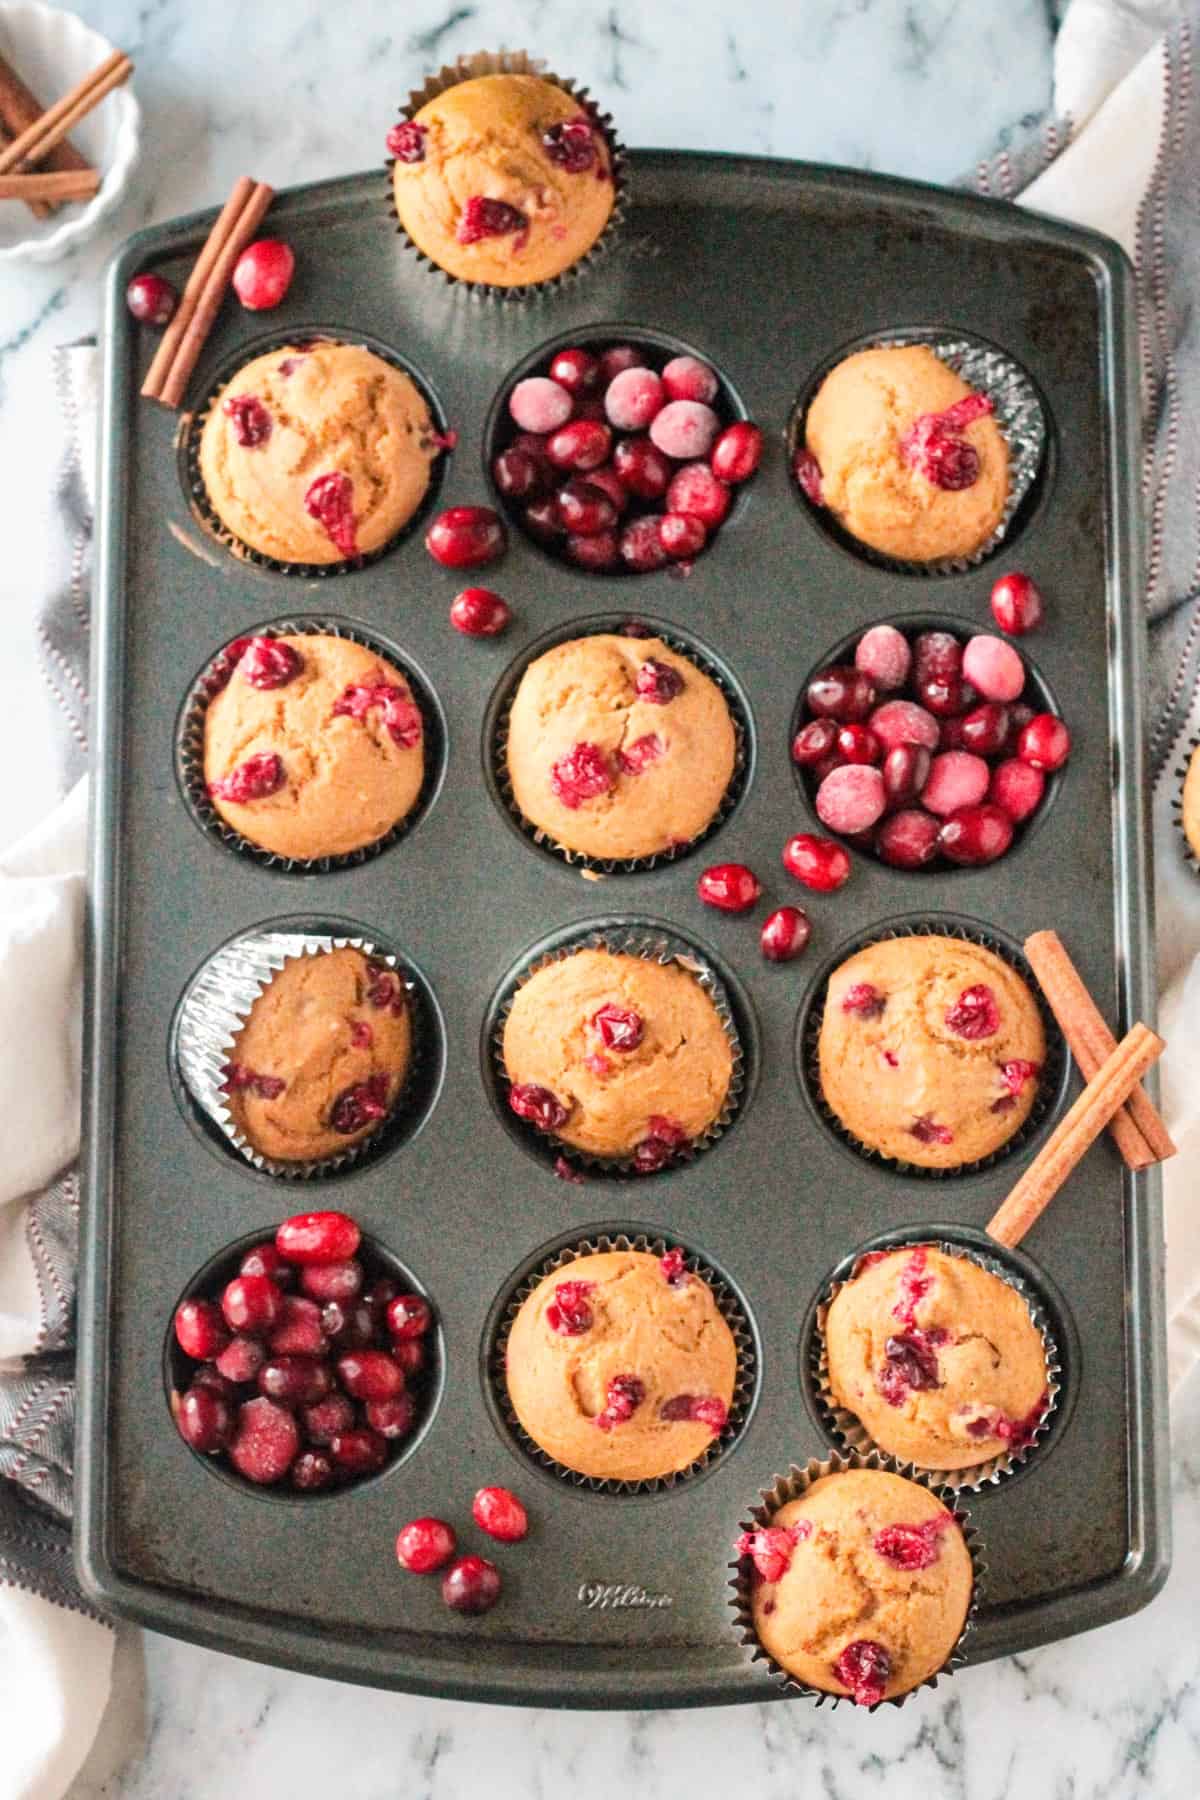 Baked pumpkin cranberry muffins in a muffin pan with fresh cranberries filling some of the cavities.